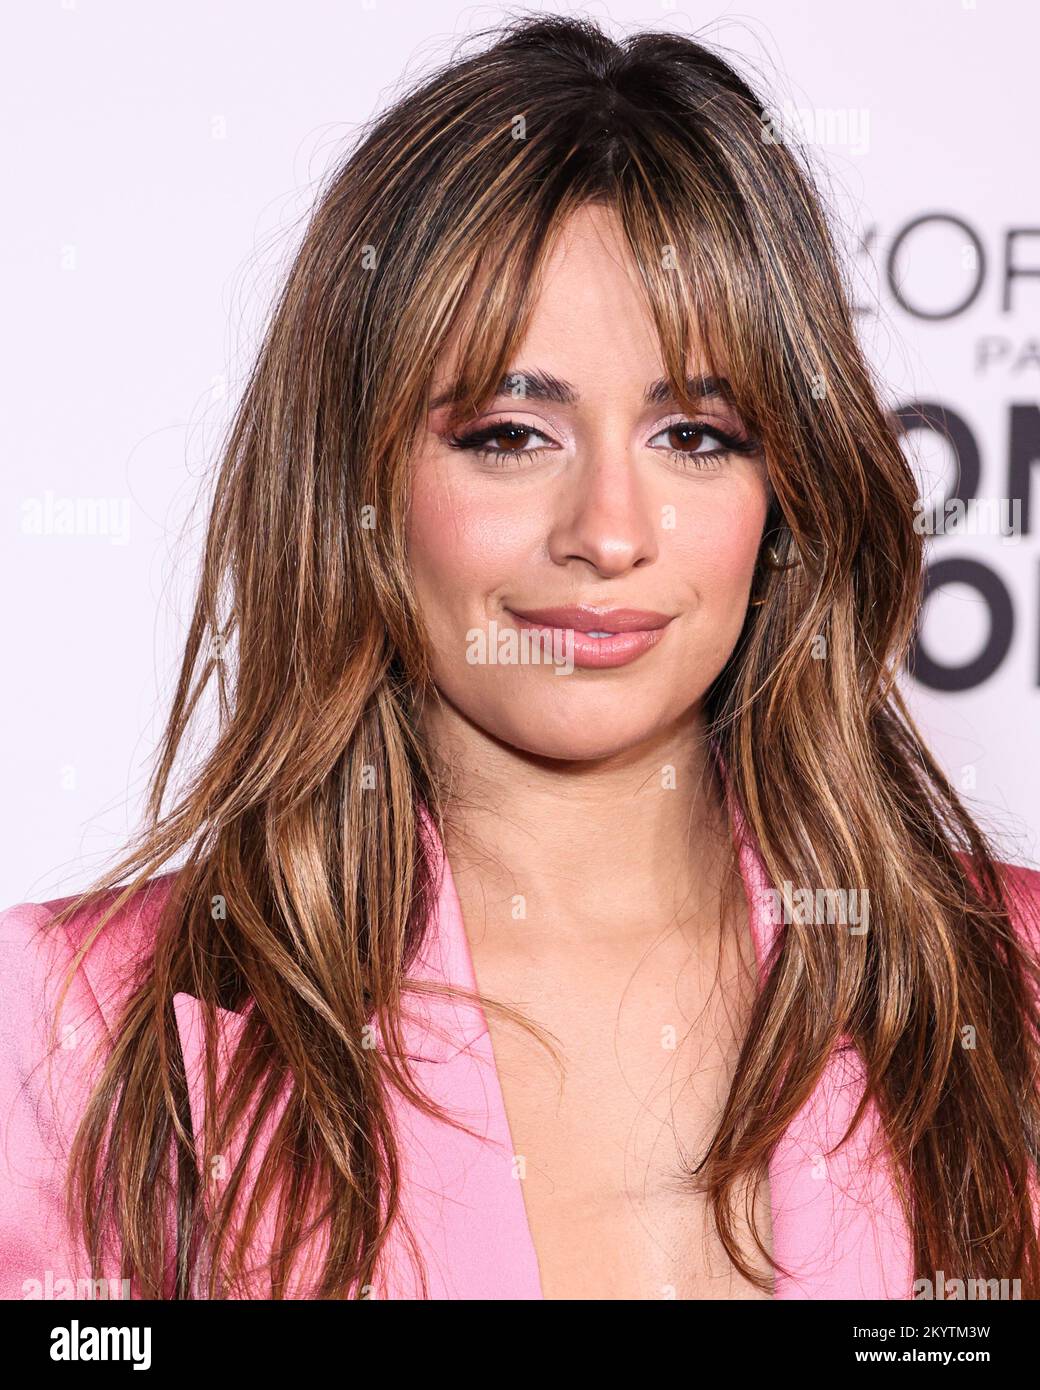 LOS ANGELES, CALIFORNIA, USA - DECEMBER 01: Cuban-American singer-songwriter Camila Cabello arrives at the L'Oreal Paris' Women Of Worth Celebration 2022 held at The Ebell of Los Angeles on December 1, 2022 in Los Angeles, California, United States. (Photo by Xavier Collin/Image Press Agency) Stock Photo